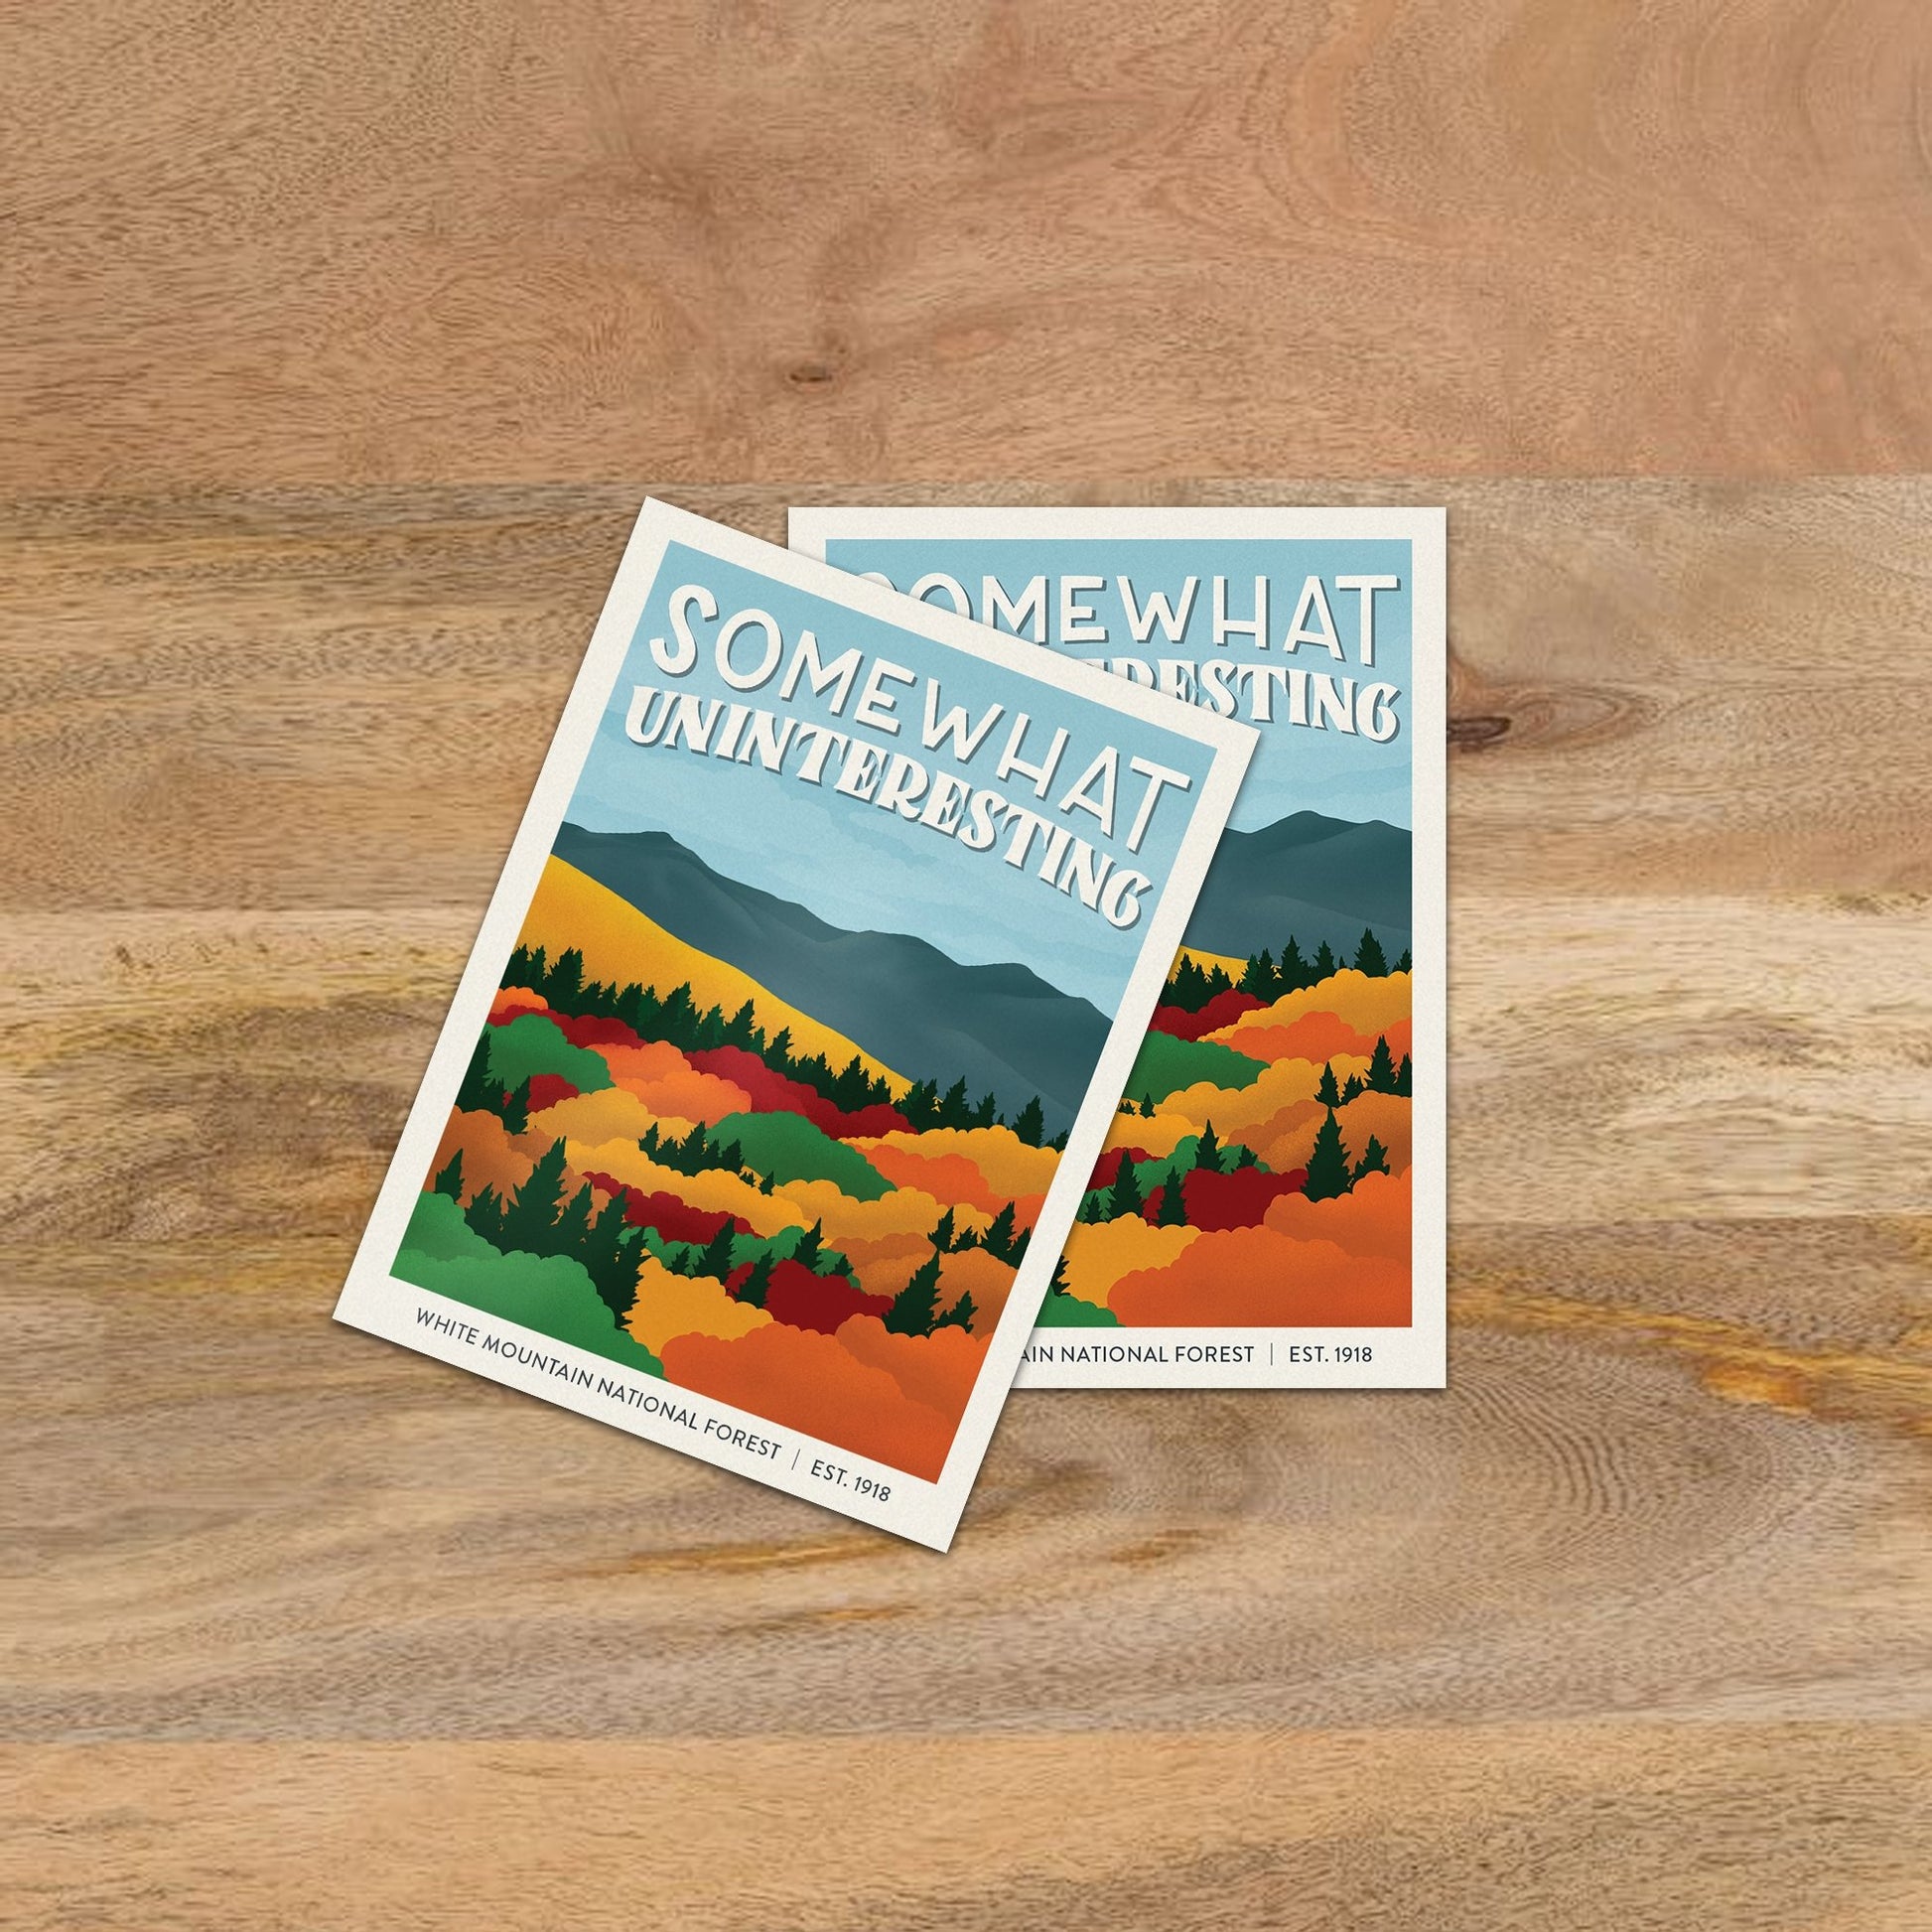 Subpar Parks™ American Public Lands Stickers - Amber Share Design-White Mountains National Forest -